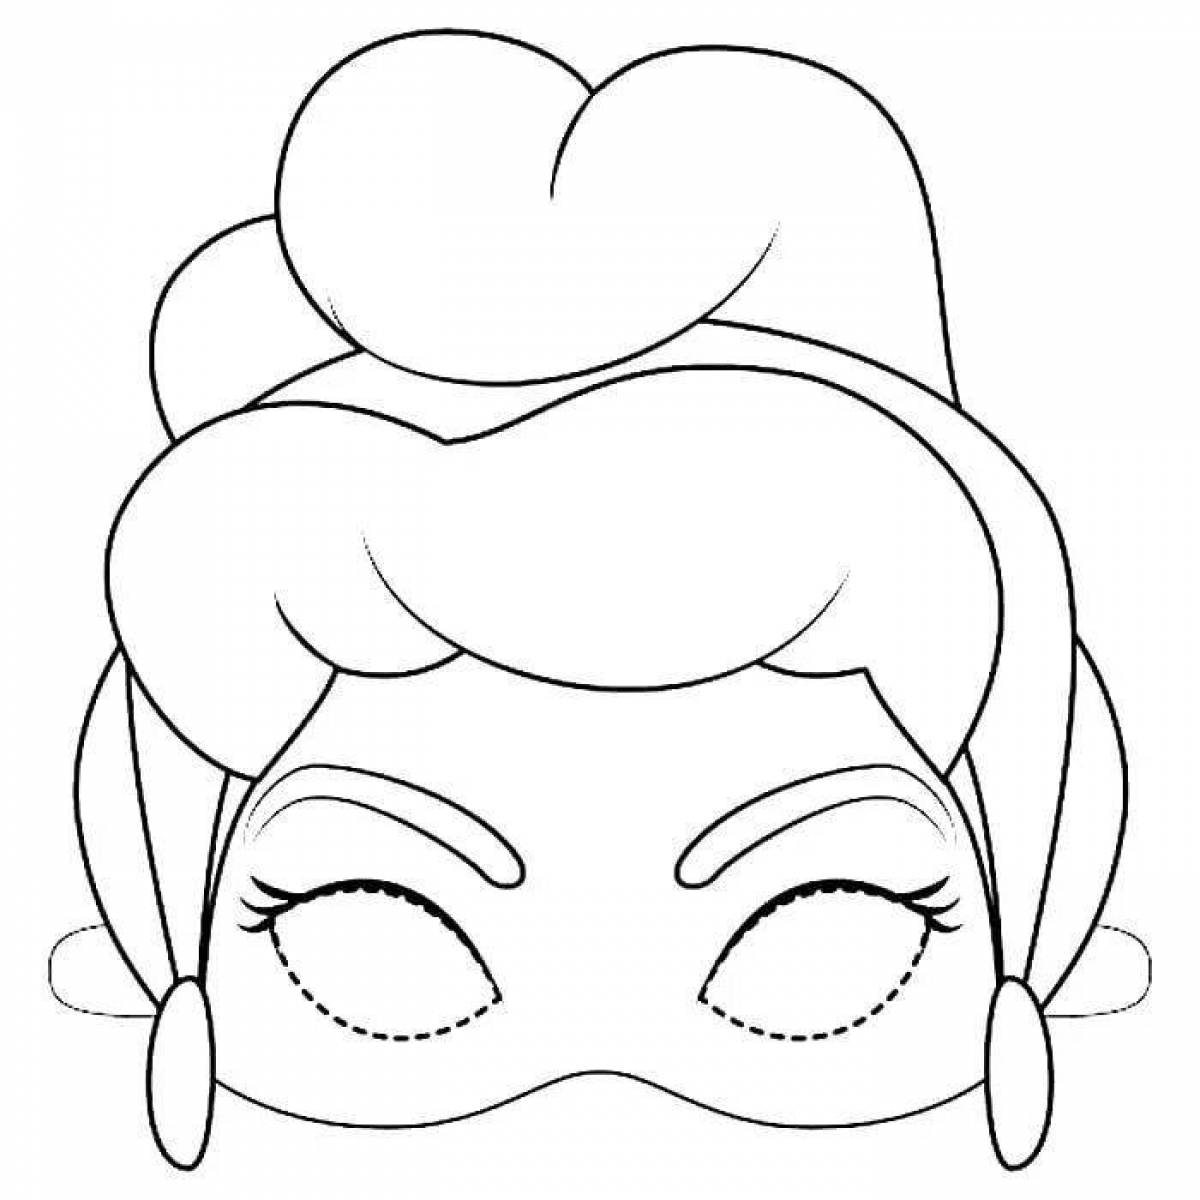 Coloring page cheeky mask